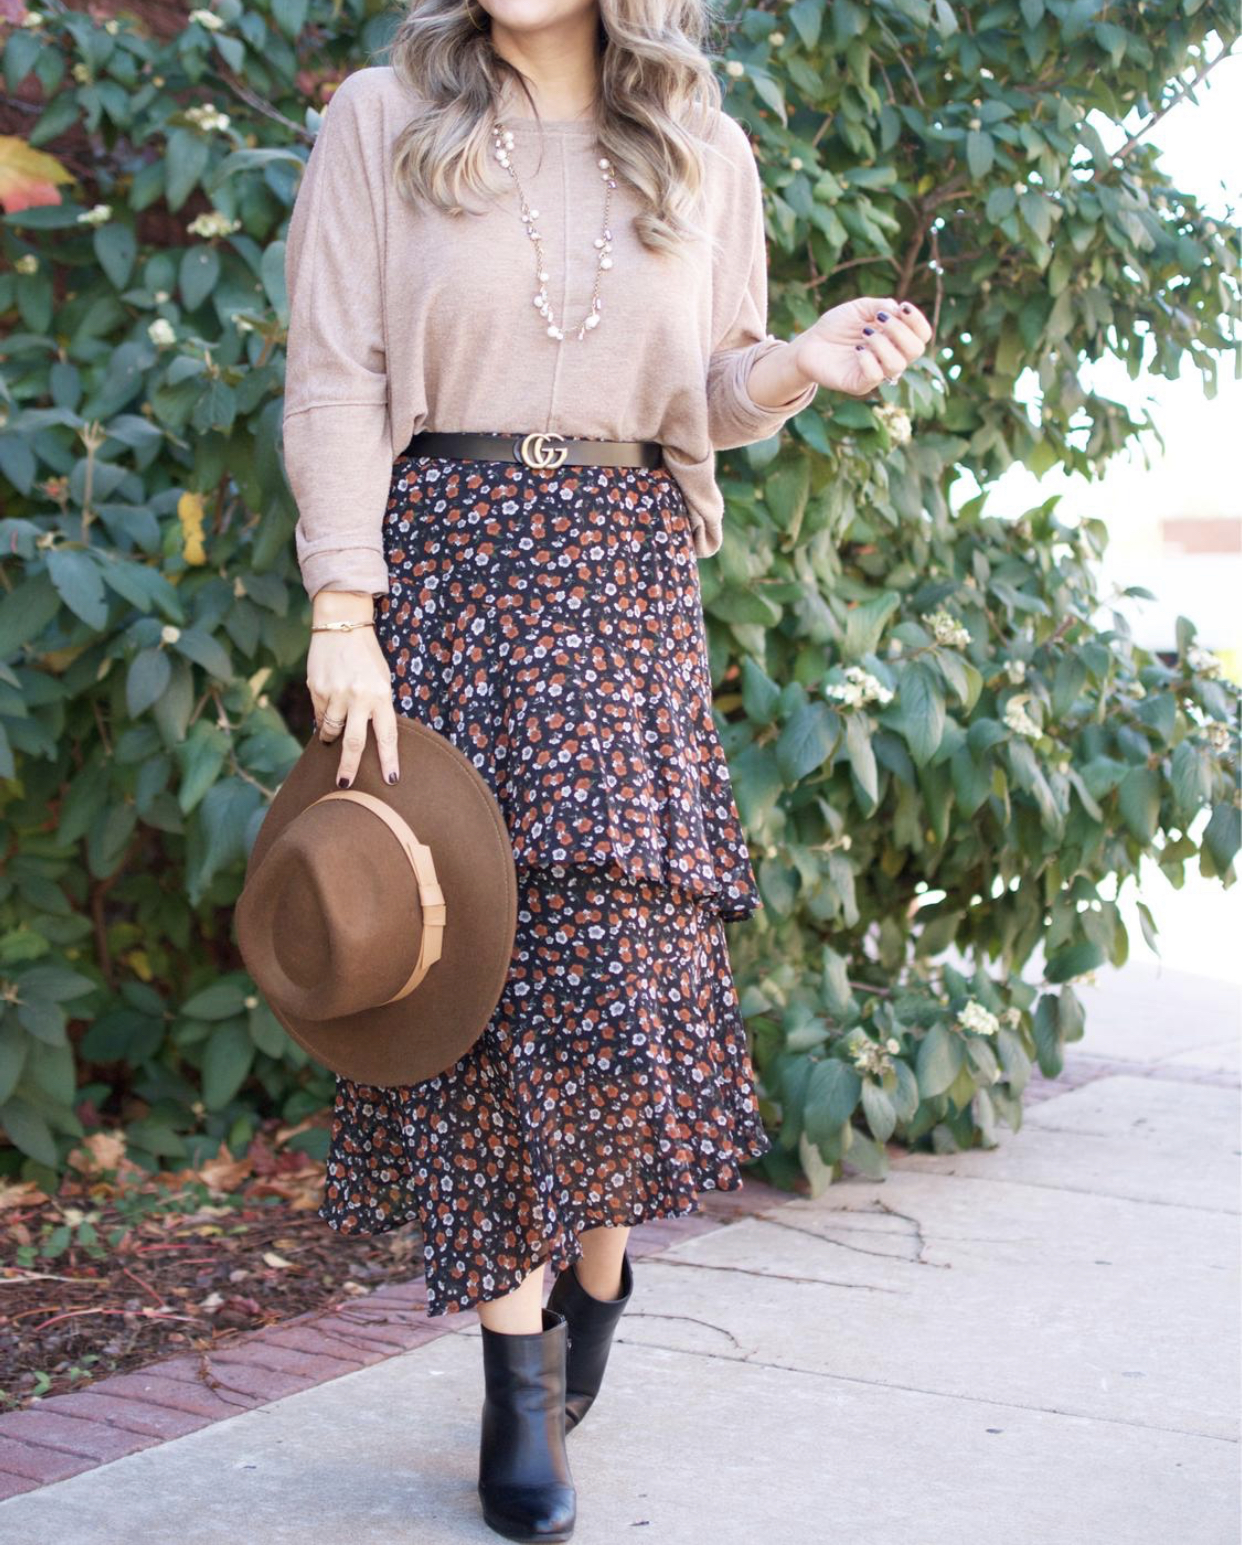 Gucci Belt, Gucci Belt Dupe, Double G Belt, Wide Brim Hat, Midi Skirt, How to style a Midi skirt, Black Booties, Stella & Dot, https://amzn.to/2LWs8St